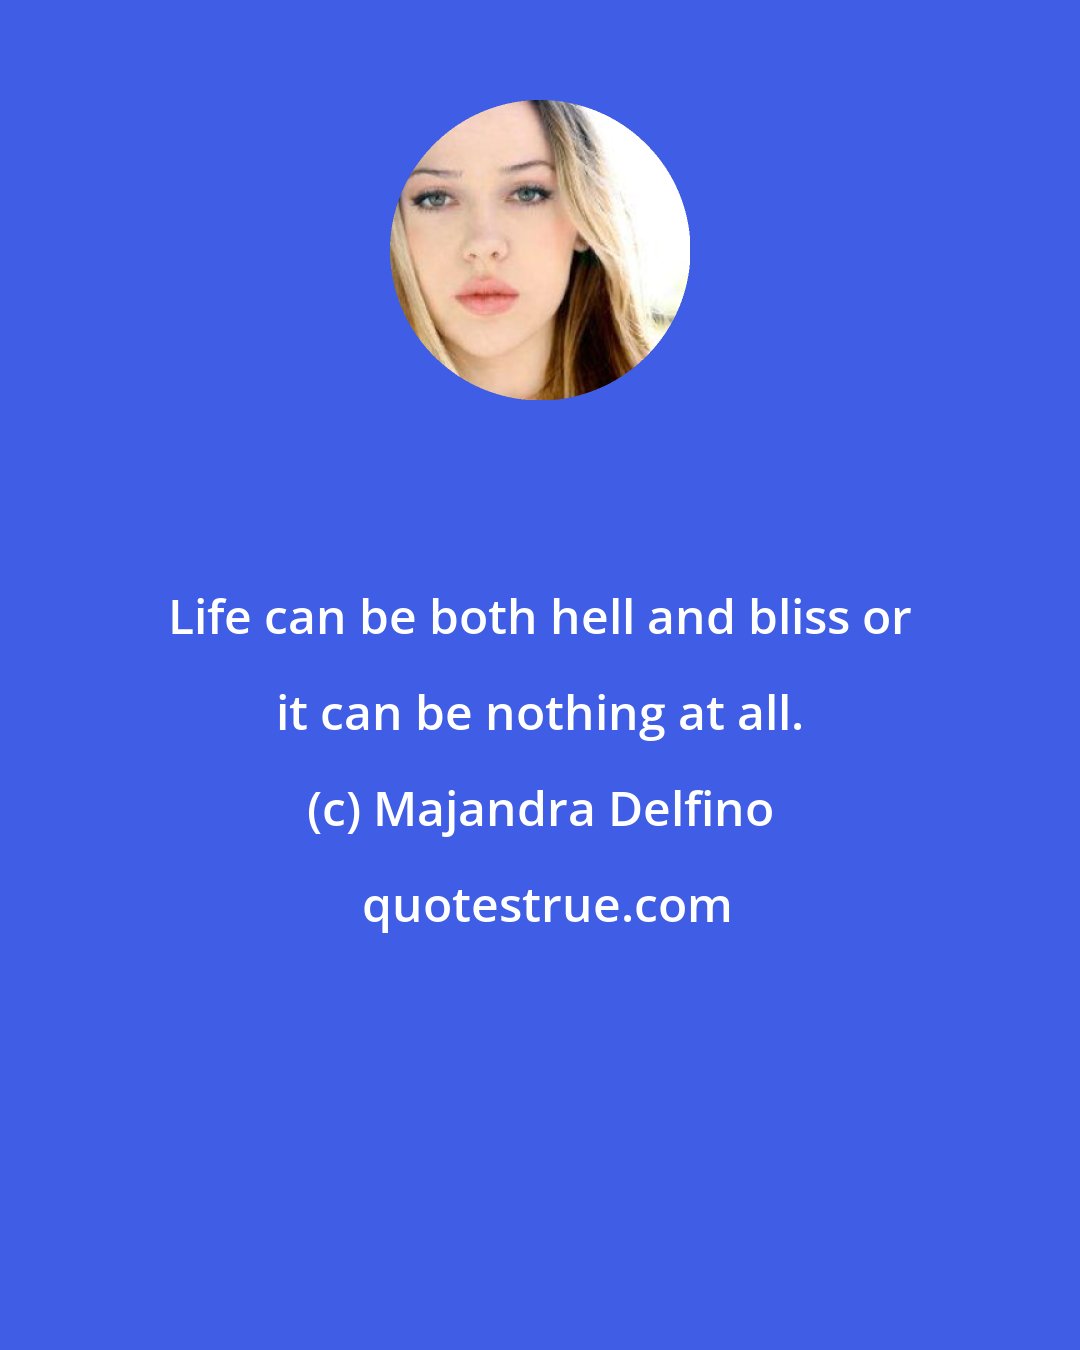 Majandra Delfino: Life can be both hell and bliss or it can be nothing at all.